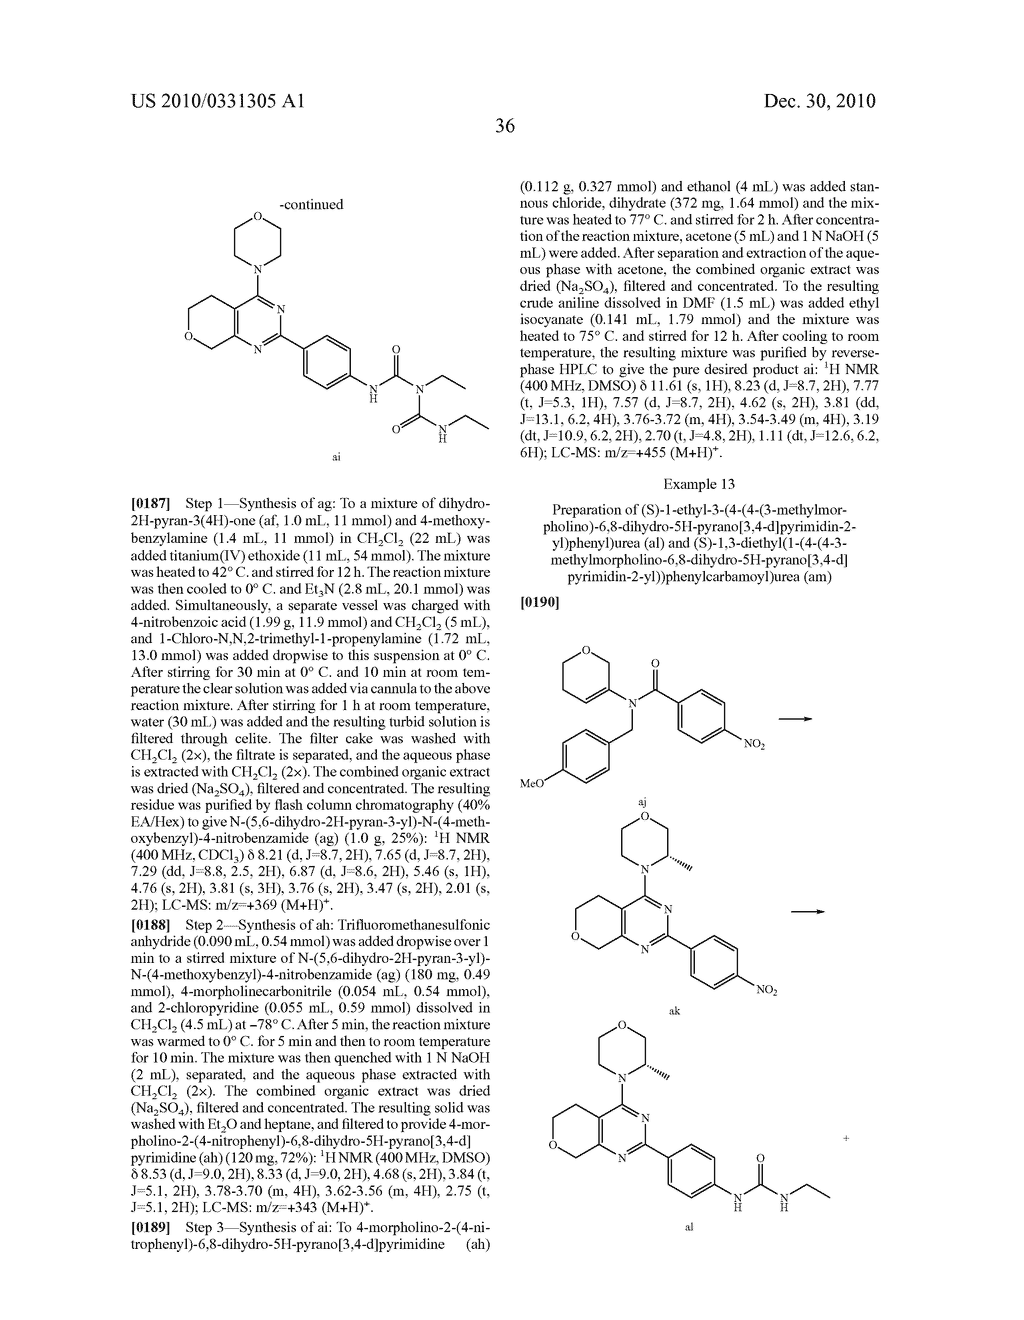 OXO-HETEROCYCLE FUSED PYRIMIDINE COMPOUNDS, COMPOSITIONS AND METHODS OF USE - diagram, schematic, and image 40